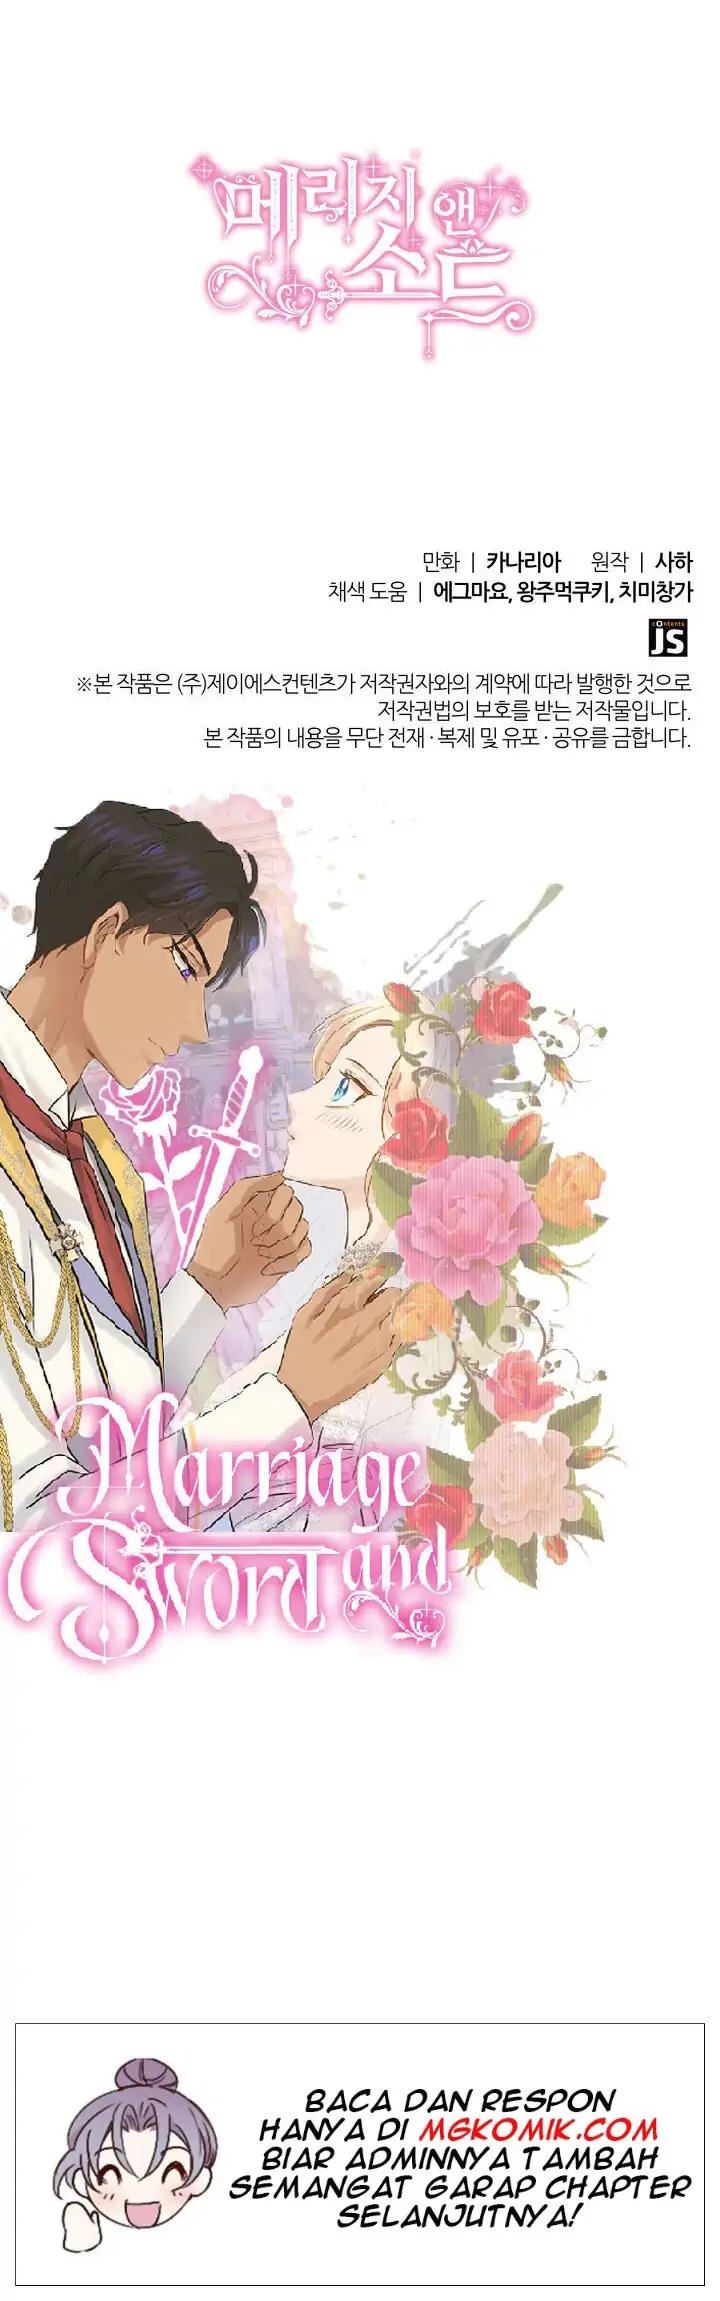 Marriage and Sword Chapter 13